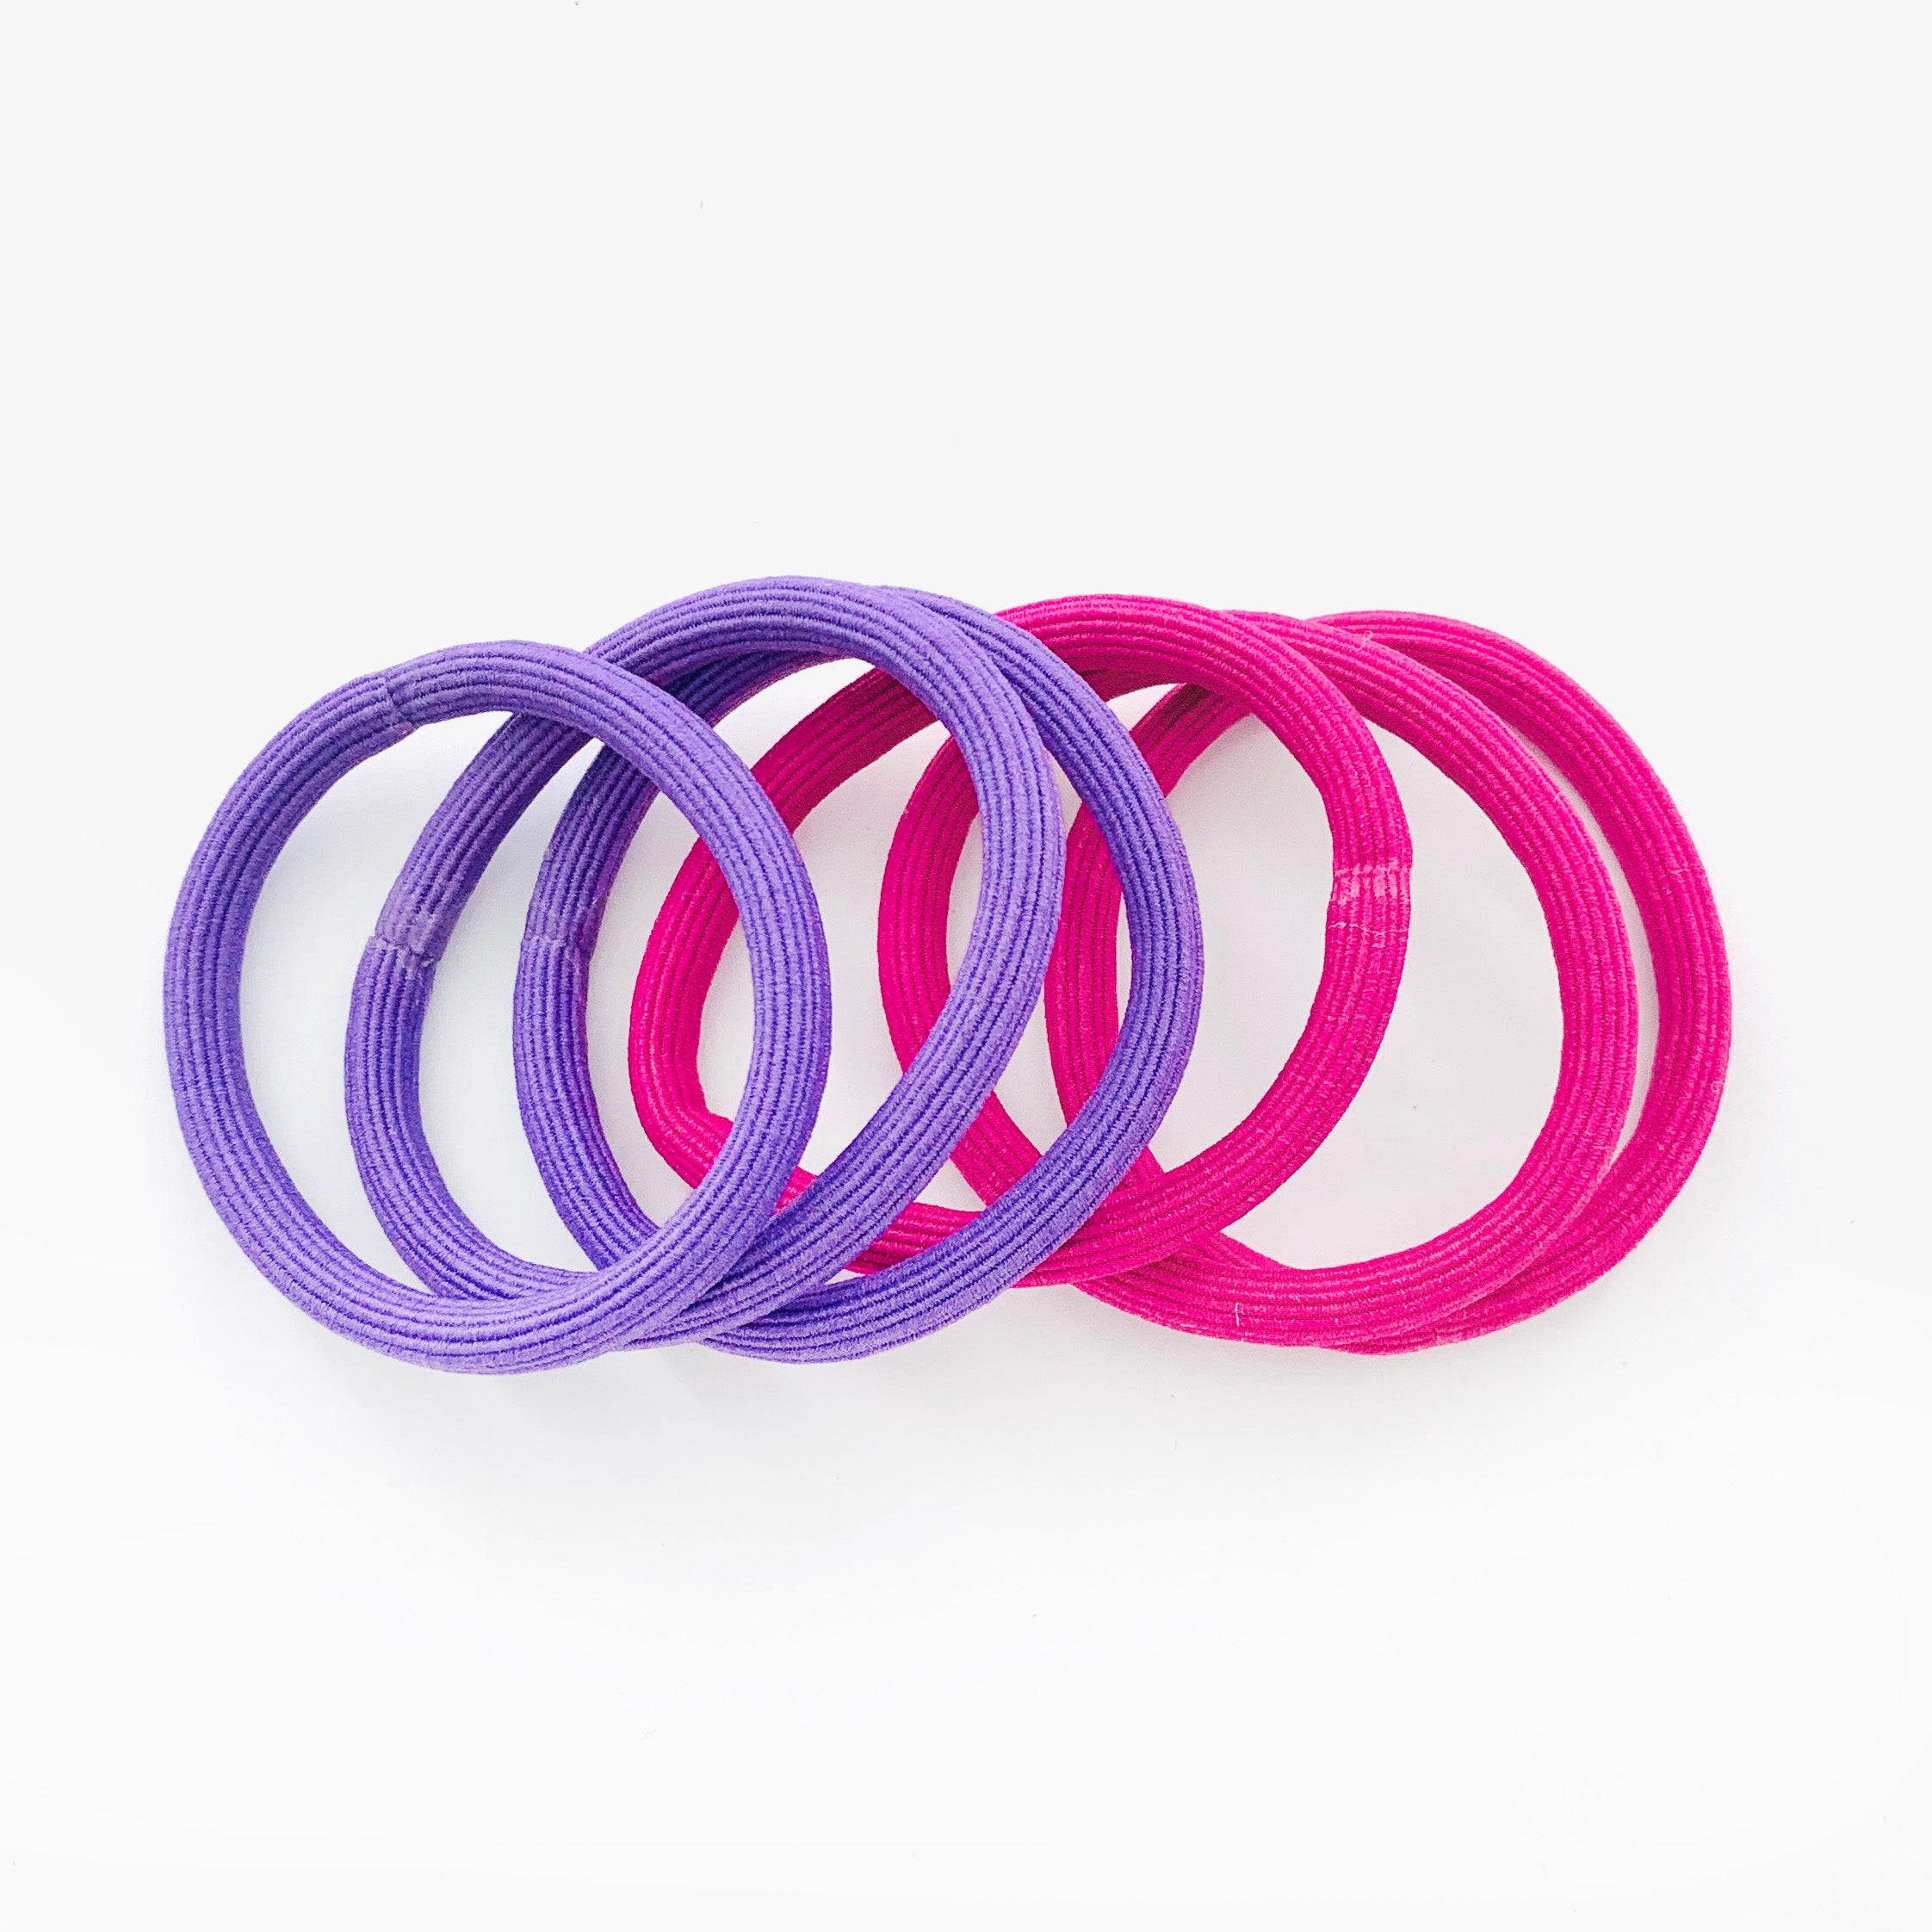 Rubber bands in purple and pink